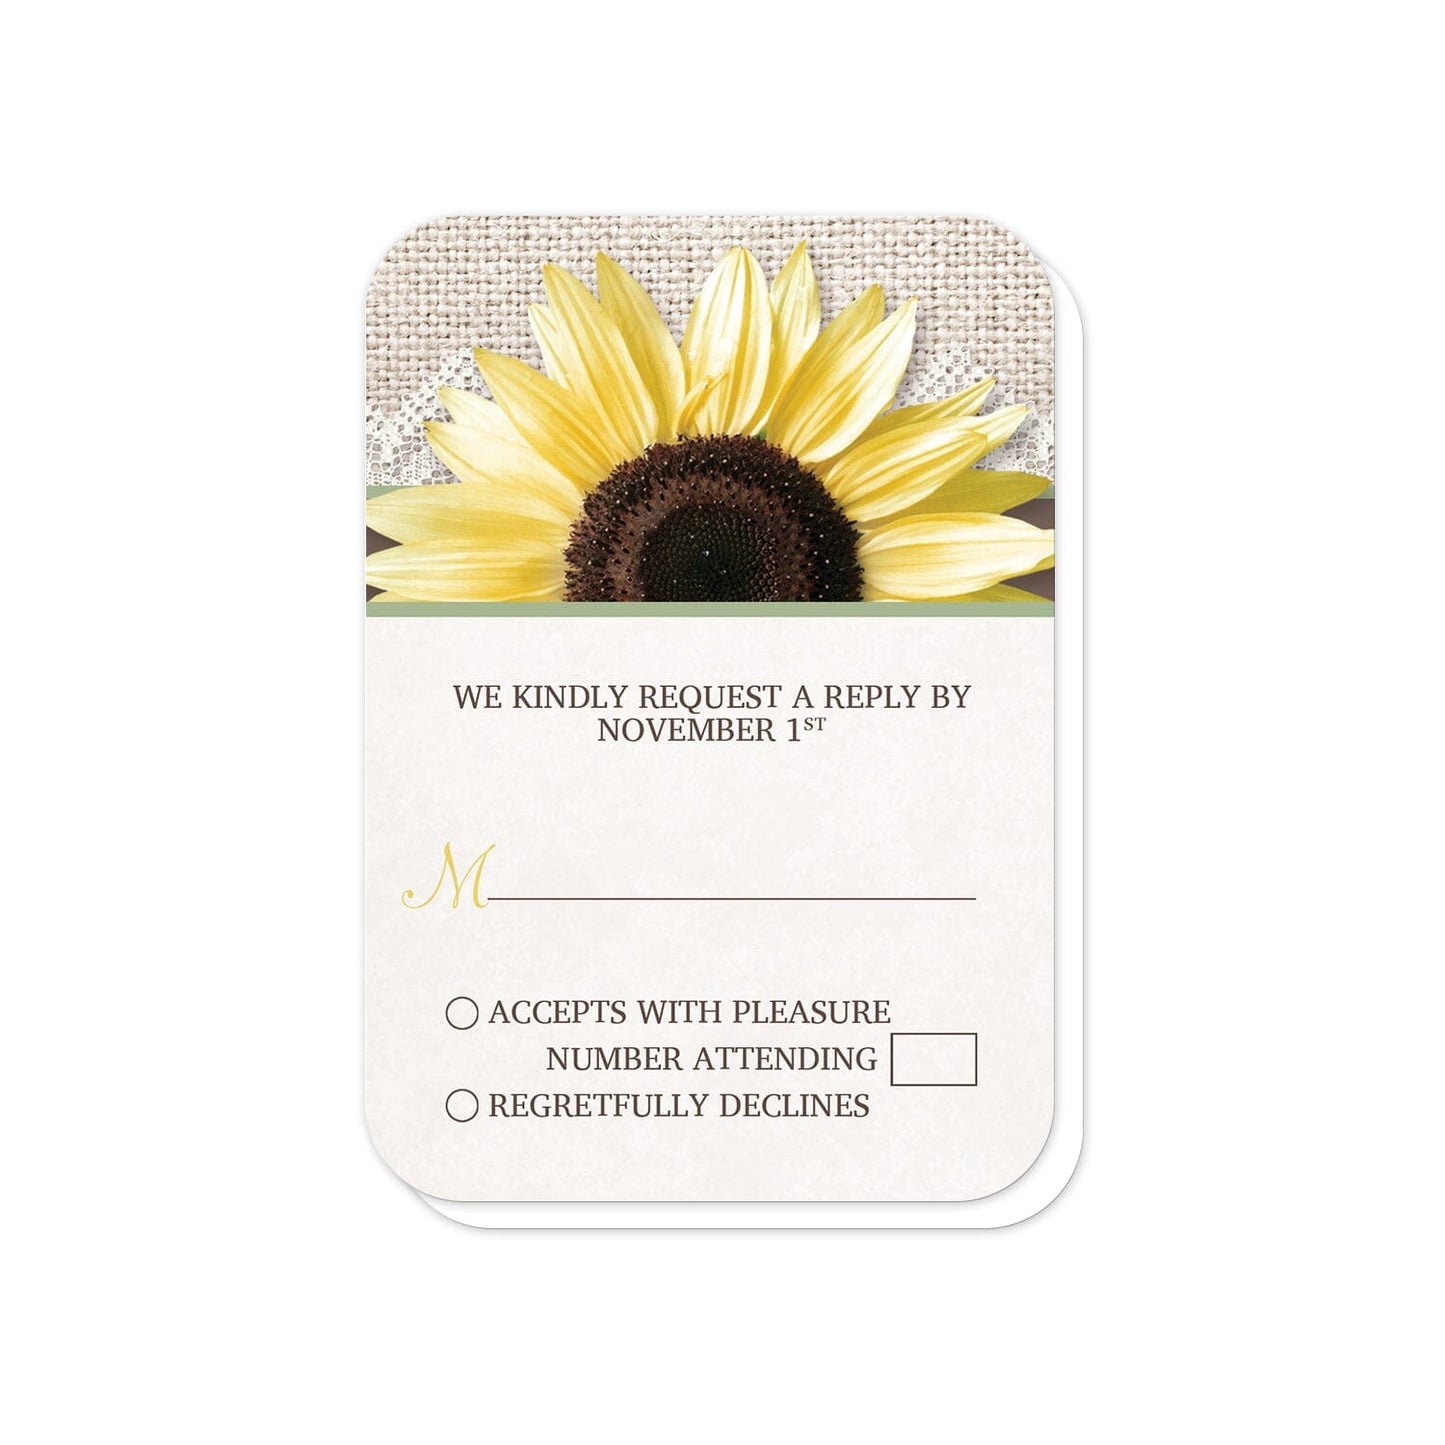 Burlap Lace Brown Sage Sunflower RSVP Cards (with rounded corners) at Artistically Invited.